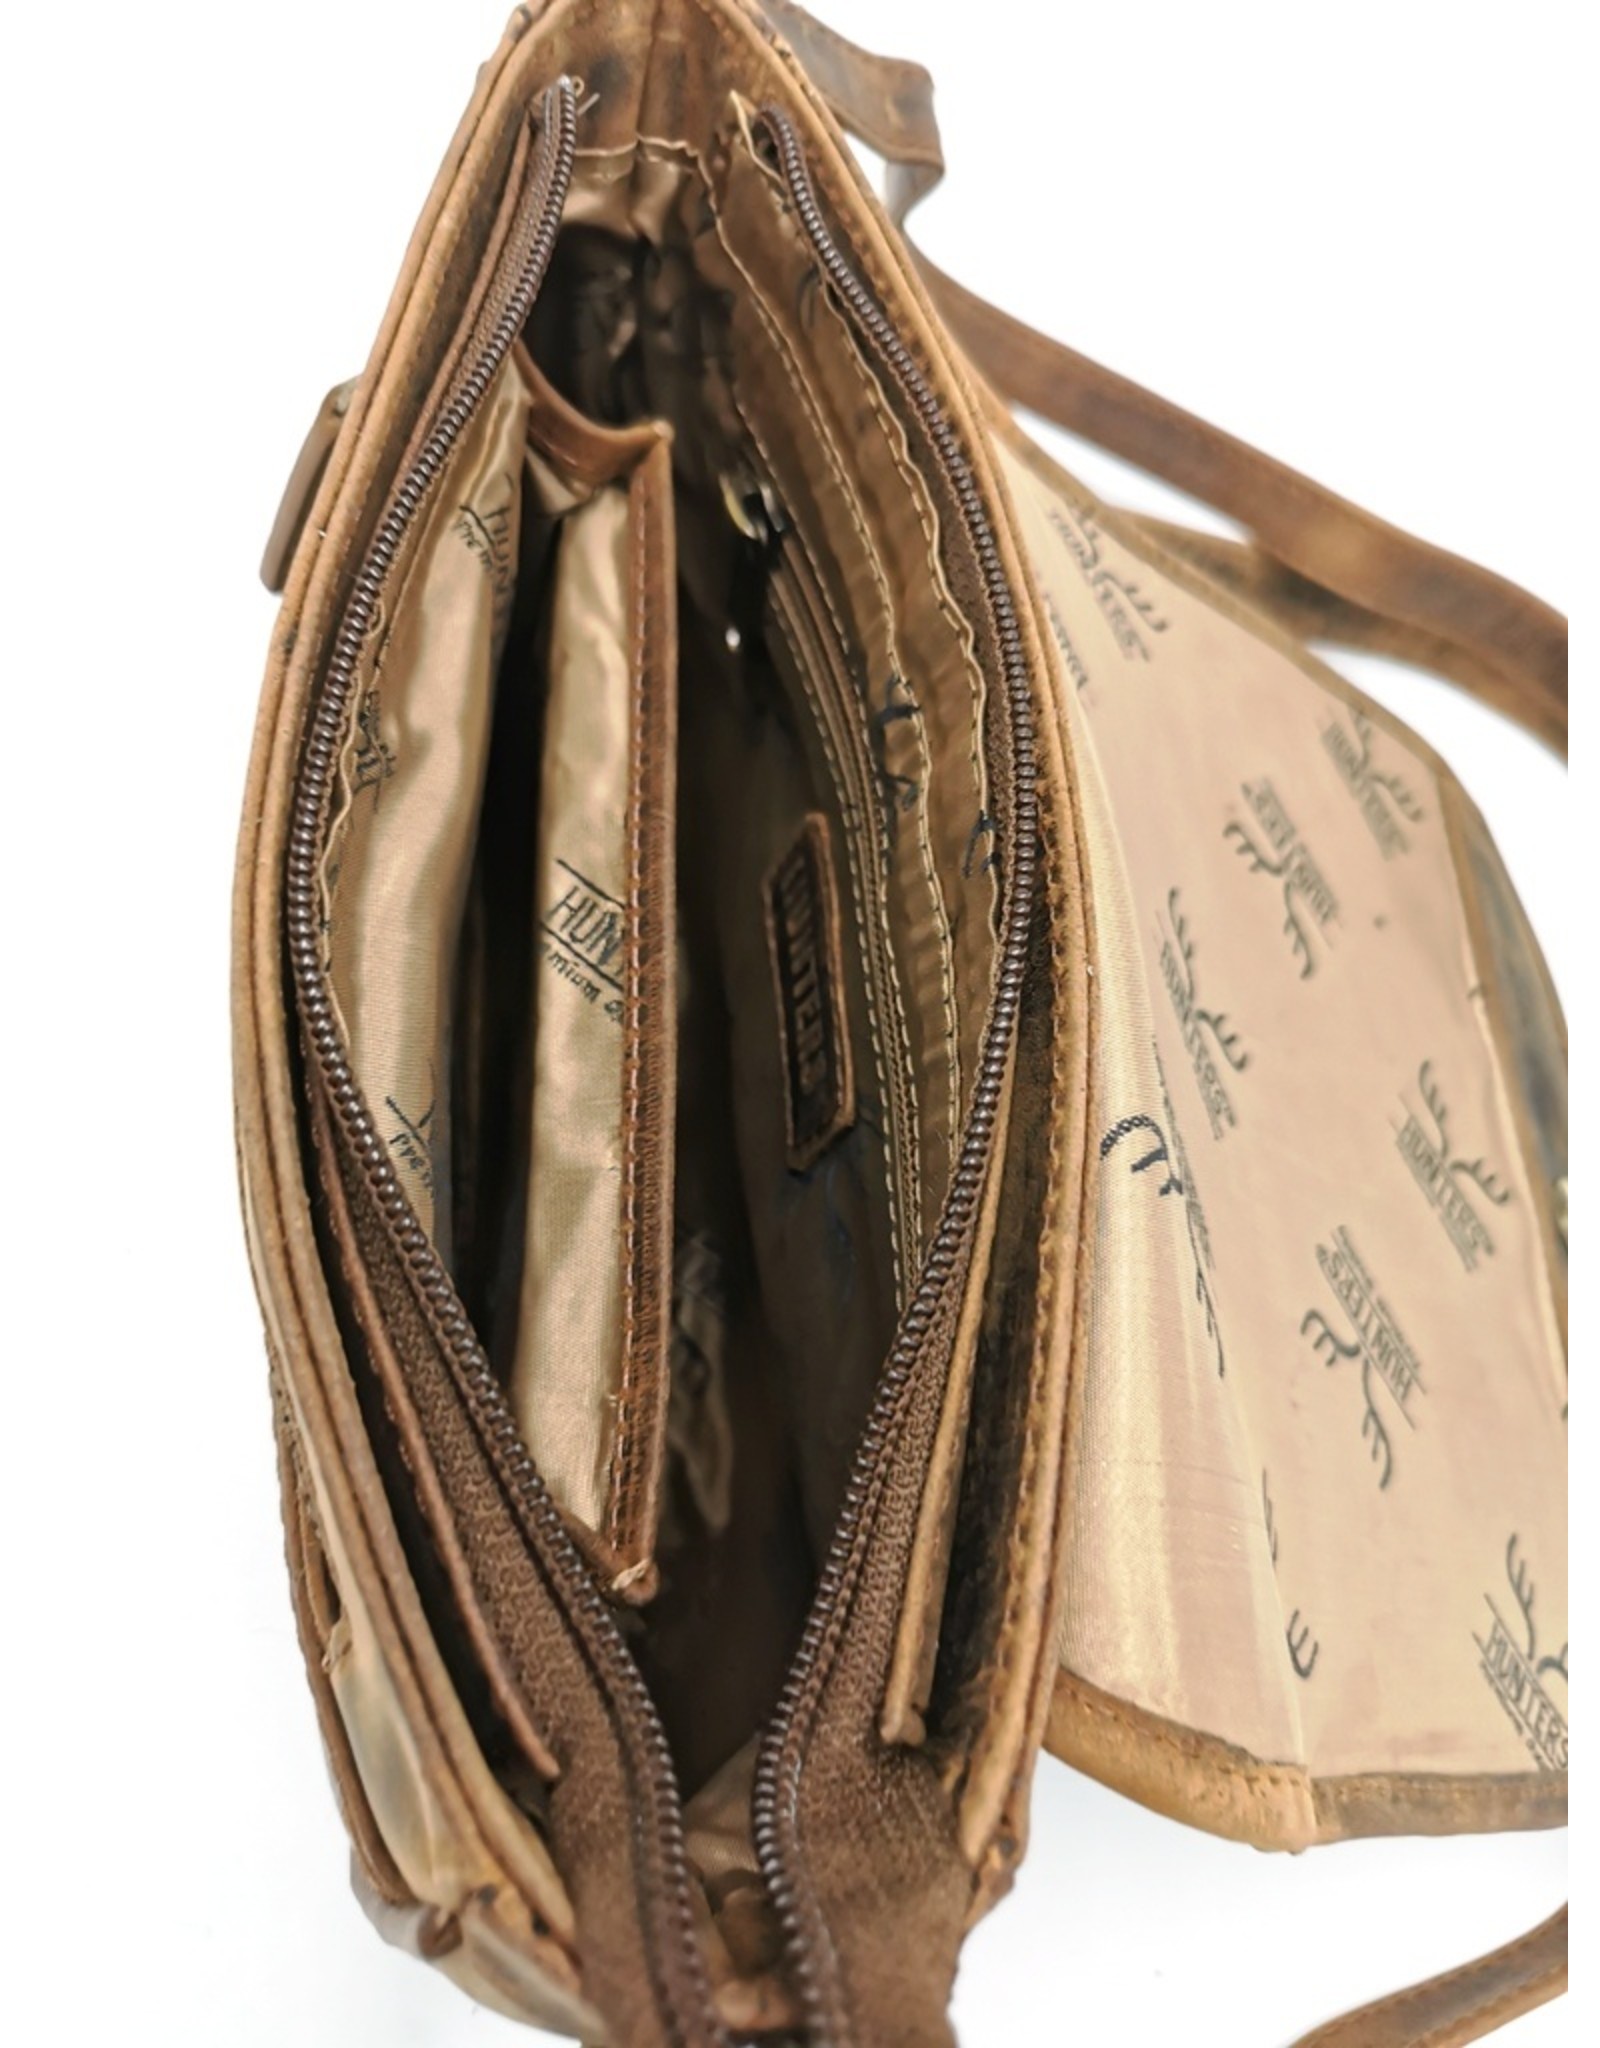 Hunters Leather Shoulder bags  leather crossbody bags - Hunters Leather Saddlebag Buffalo Leather